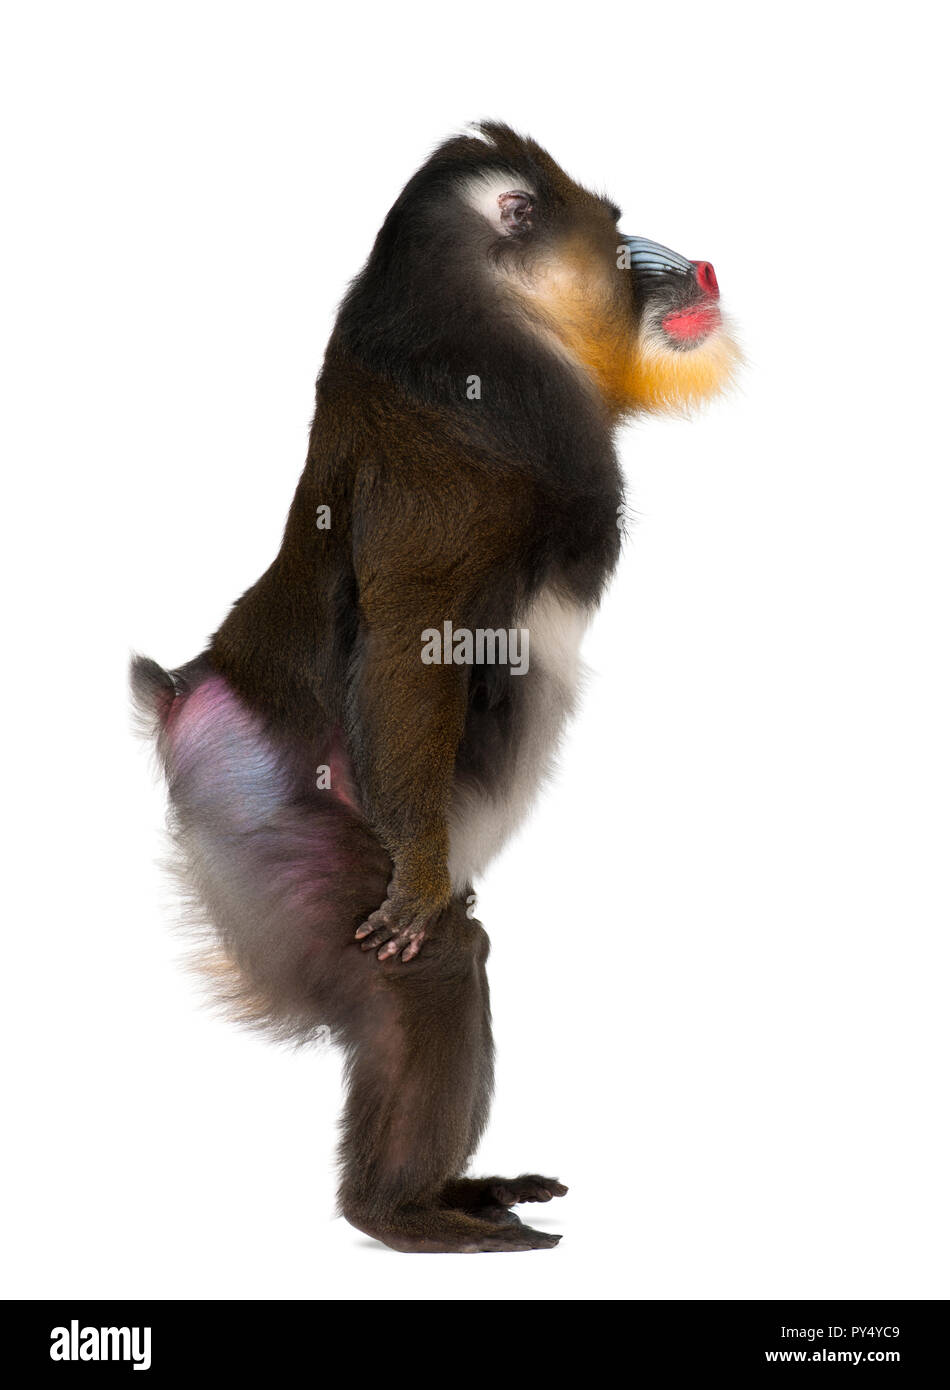 Mandrill standing, Mandrillus sphinx, 22 years old, primate of the Old World monkey family against white background Stock Photo